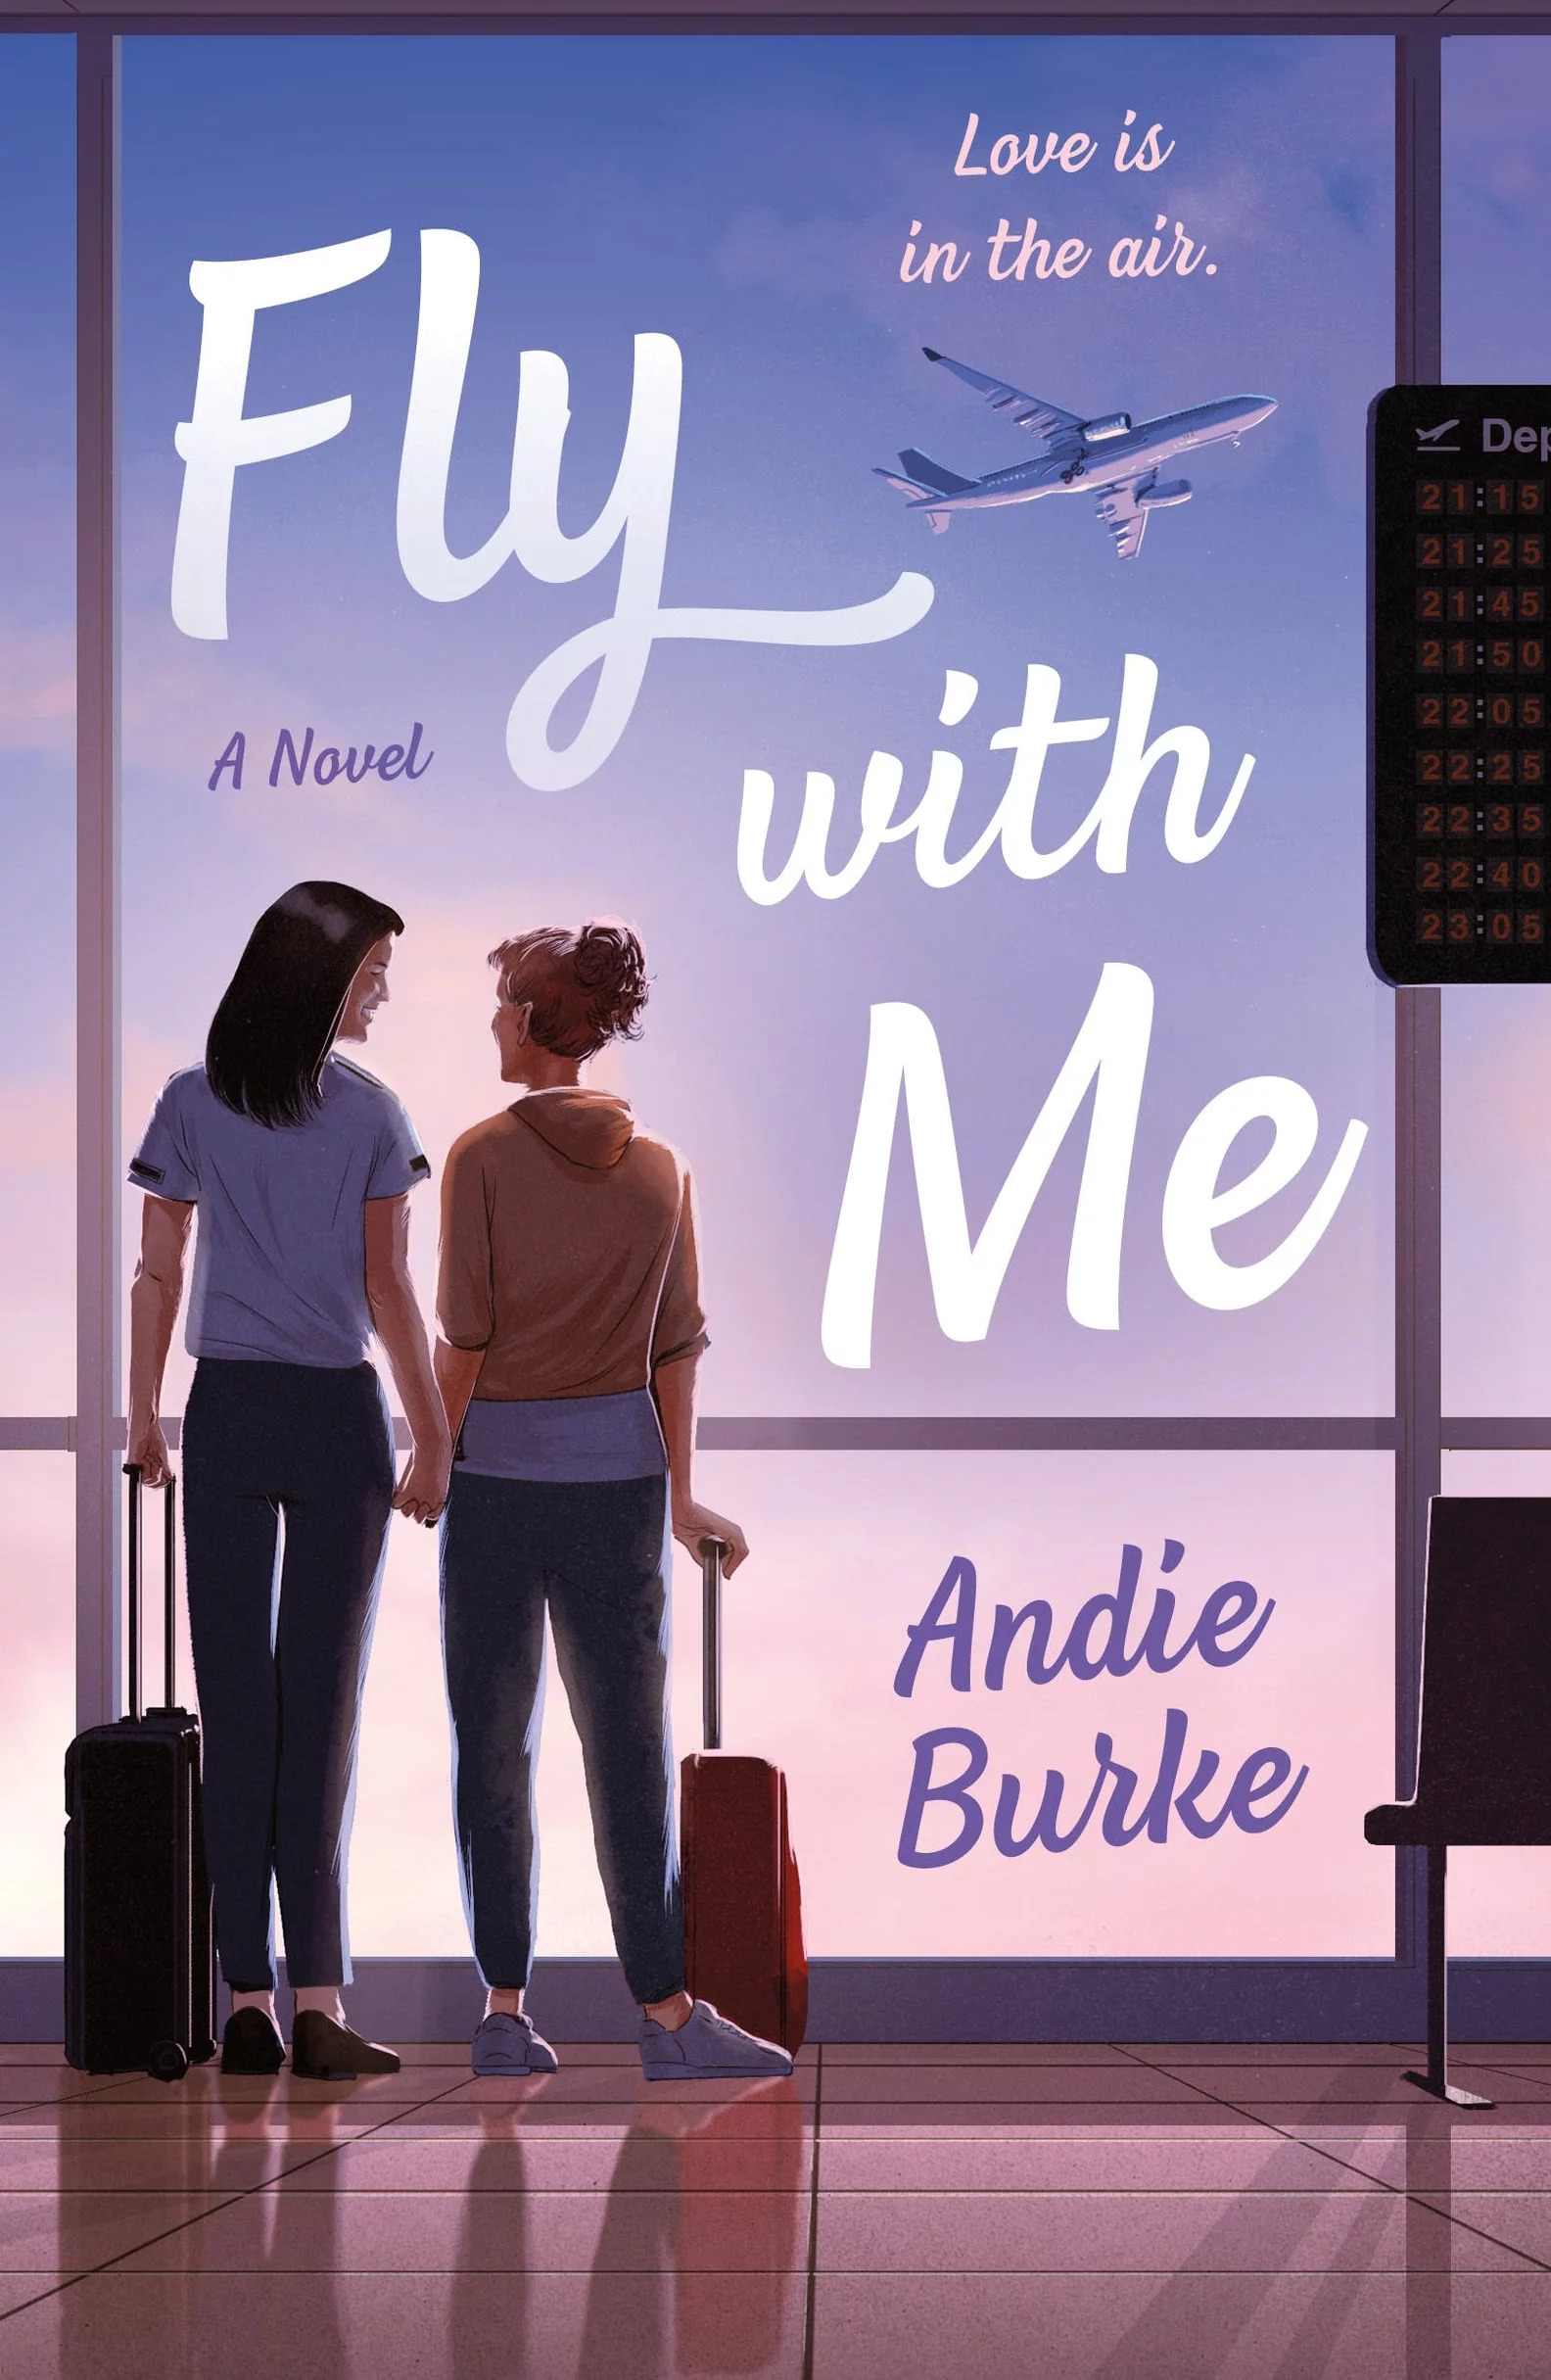 Two women standing with luggage in front of an airport window, looking at each other, smiling. The title, author, and quote "Love is in the air" are also on the cover.
